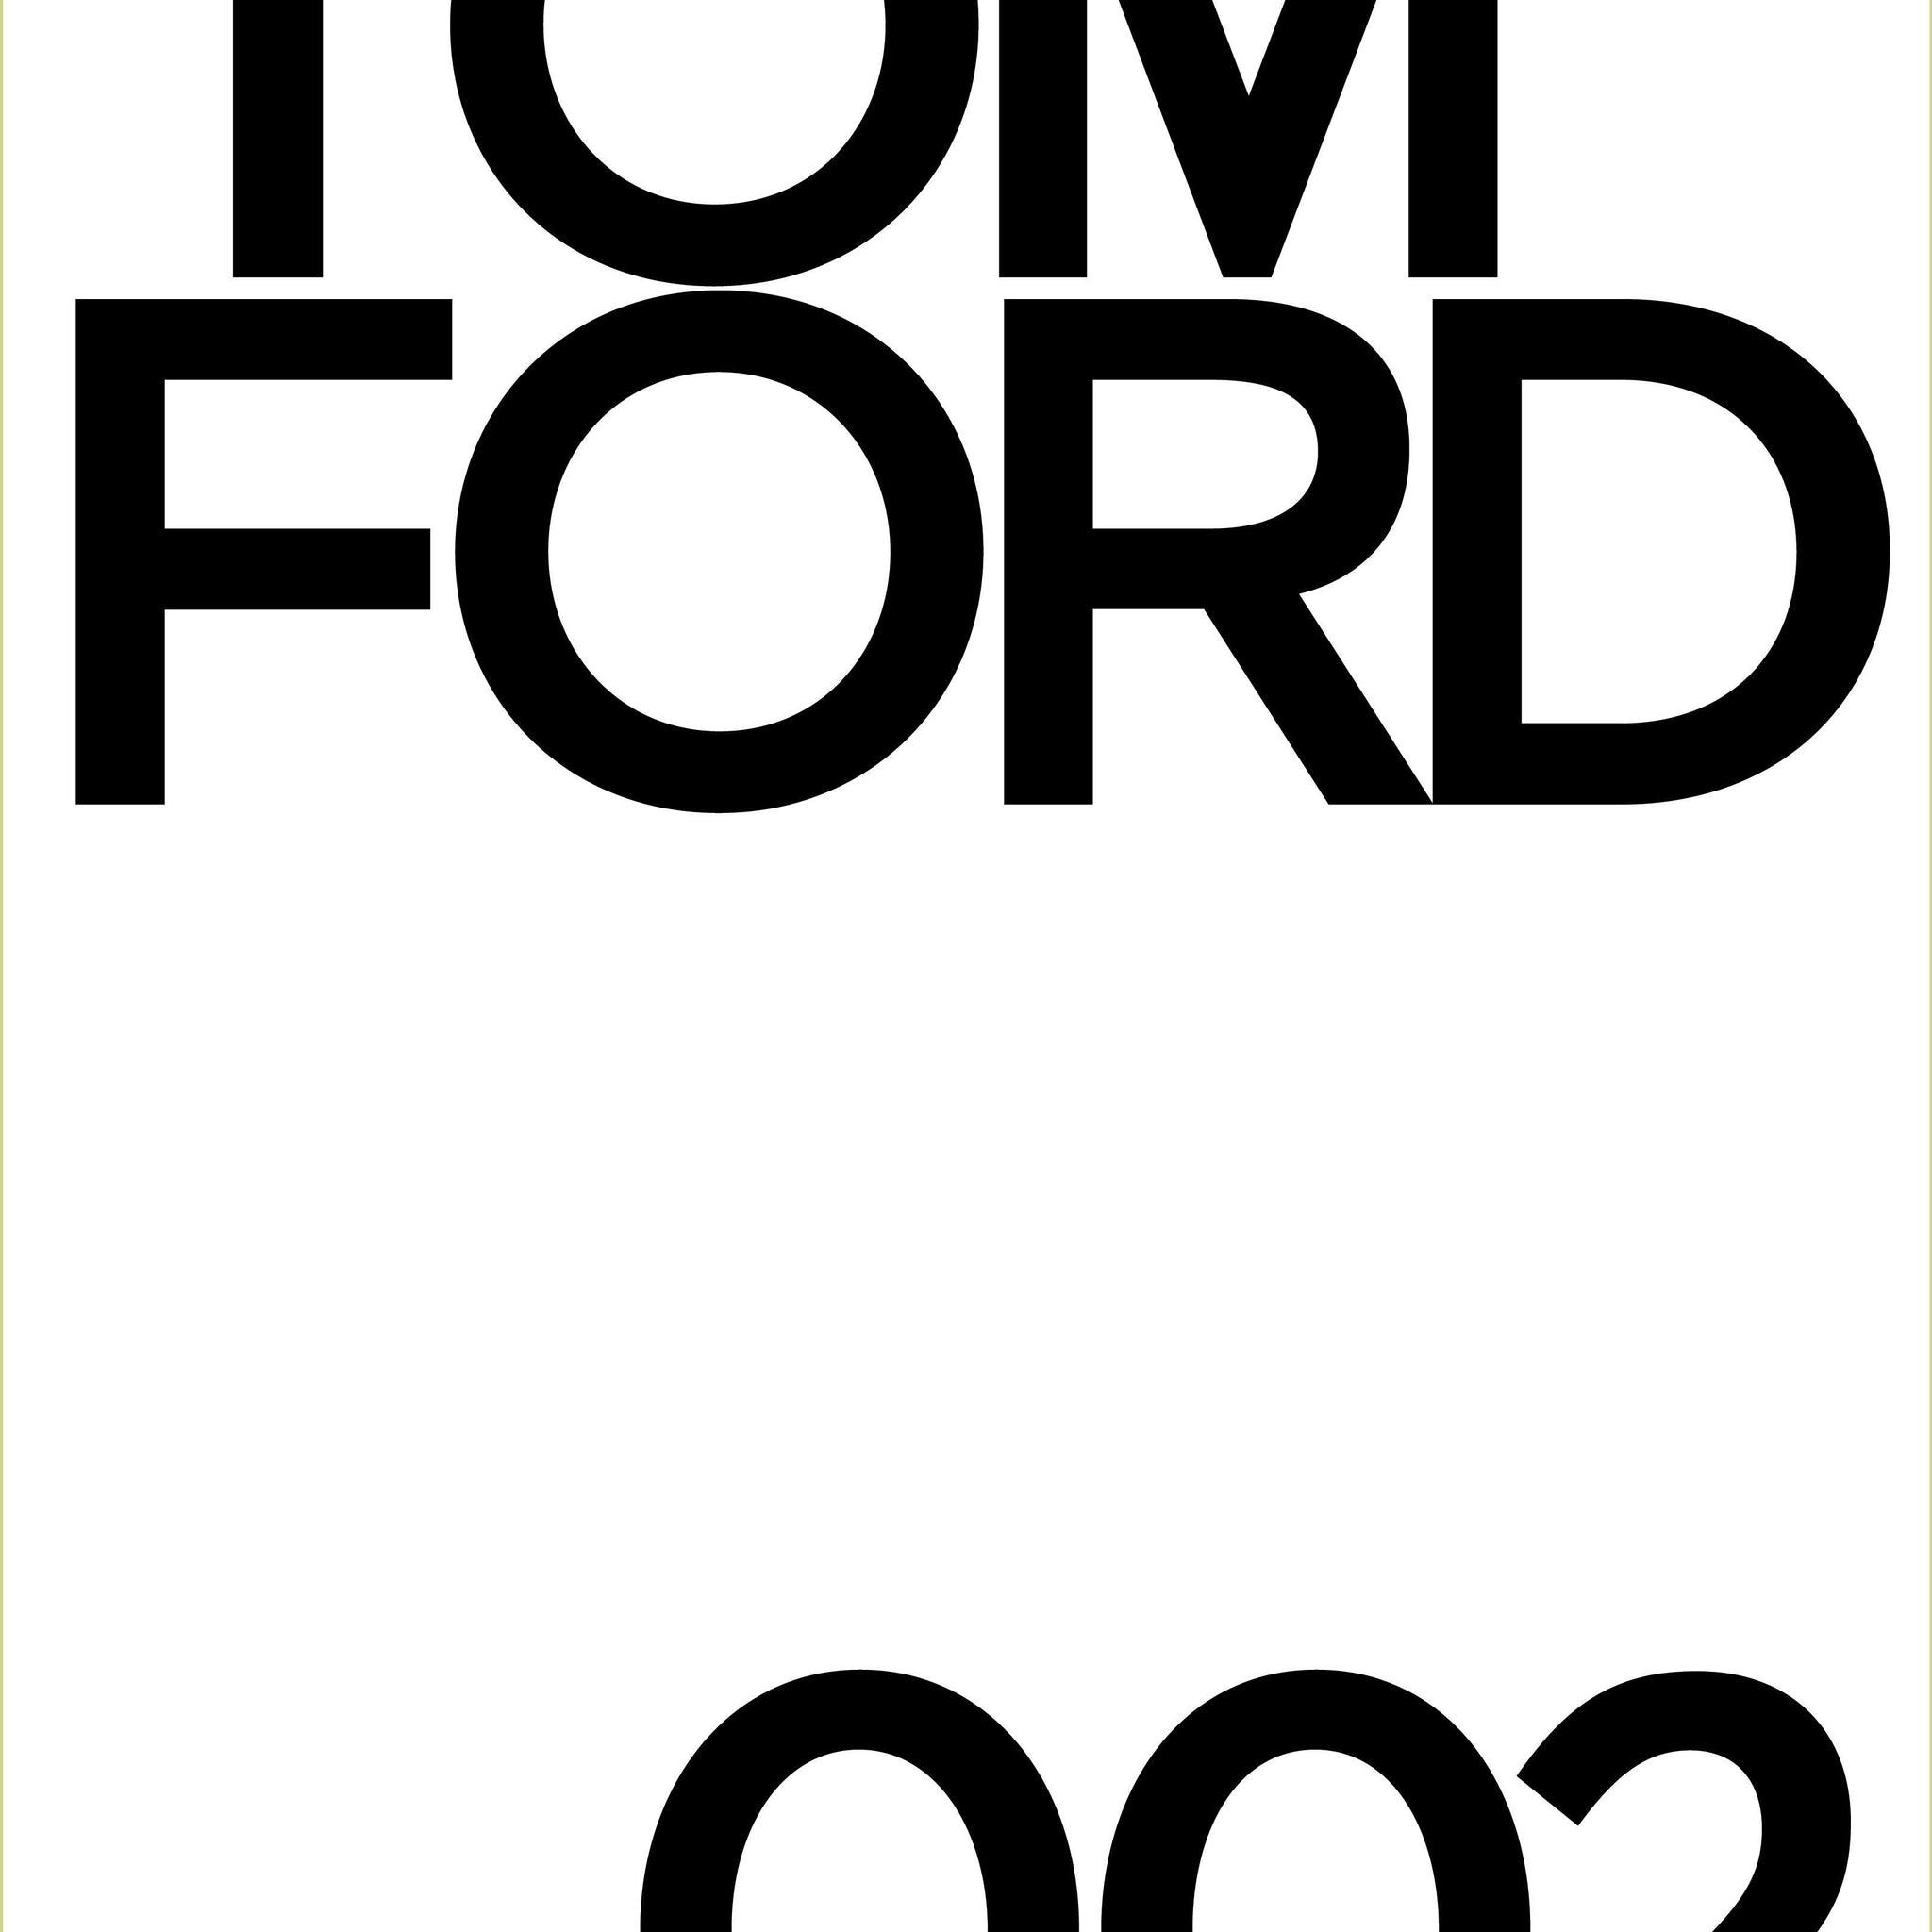 Tom Ford 002 - Handworks Nouveau Paperie